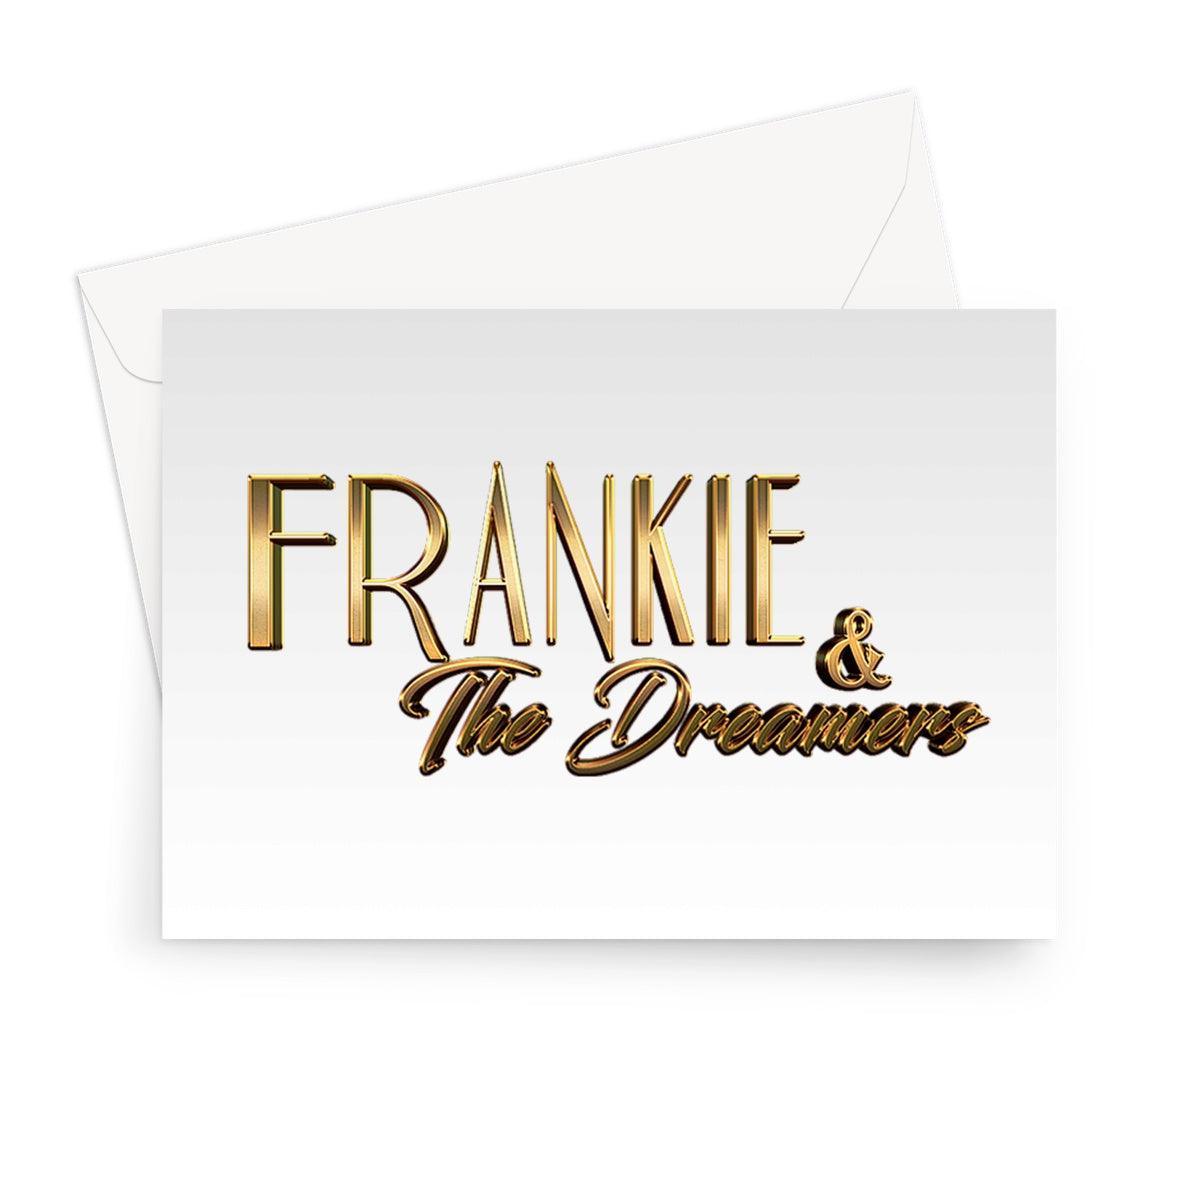 Frankie And The Dreamers Greeting Card | Stationery 7"x5" 1 Card